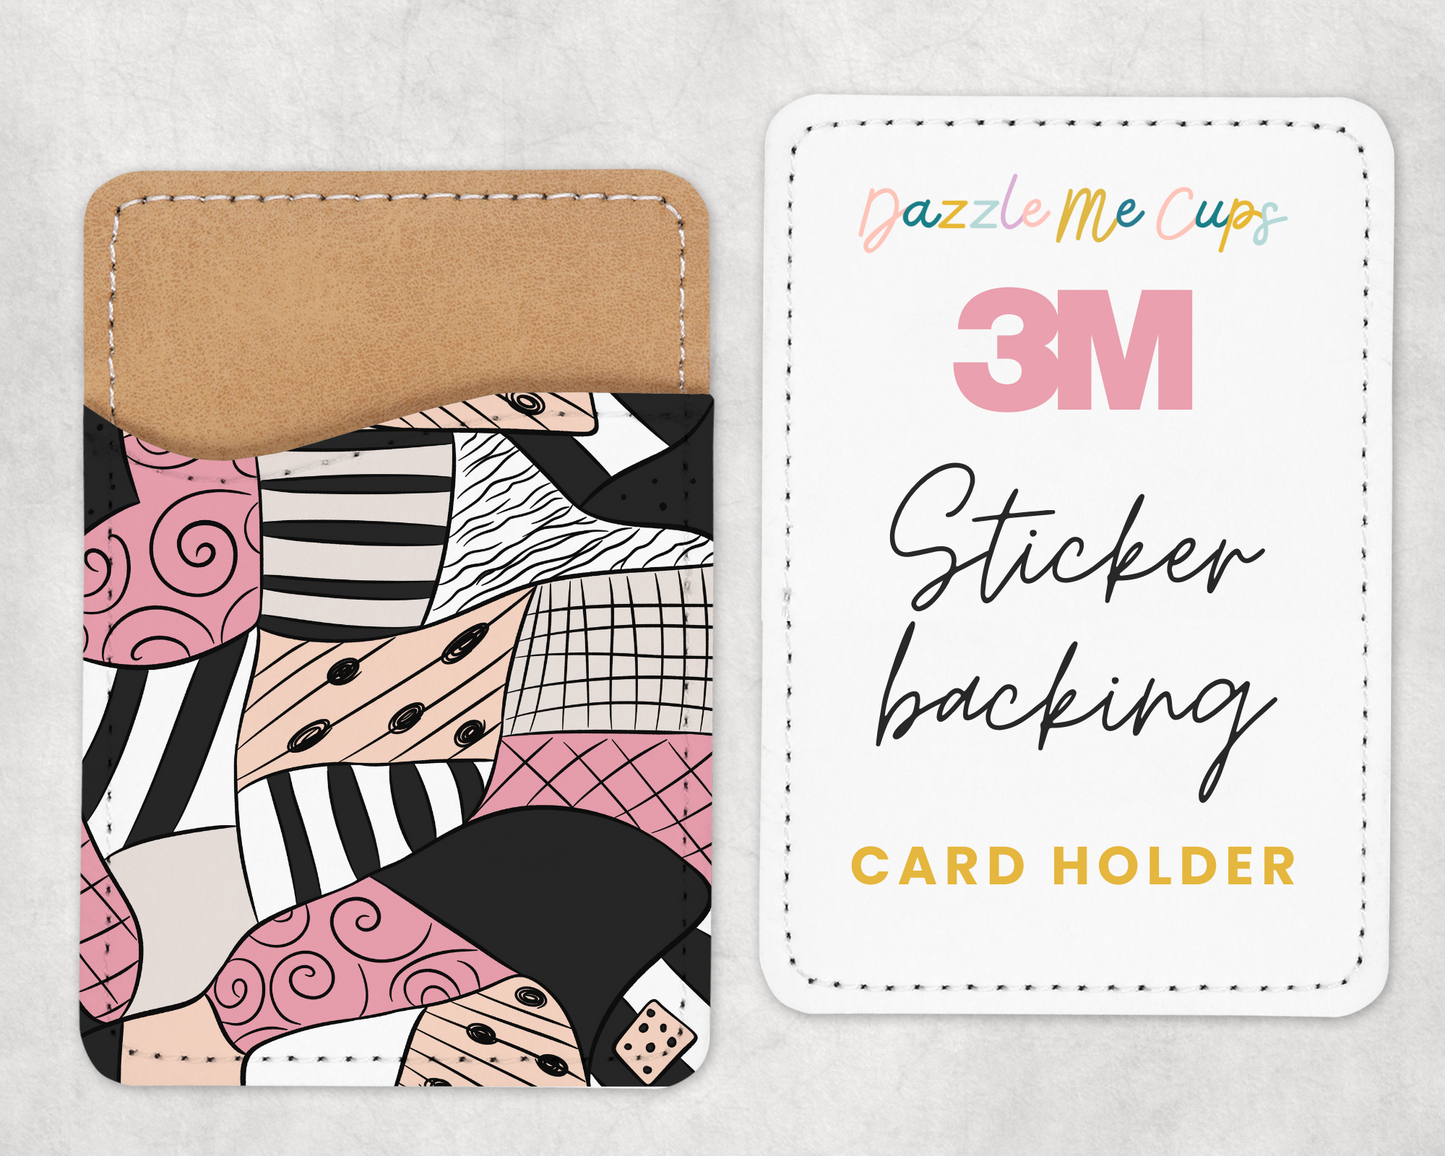 Patches Card holder magical wallets